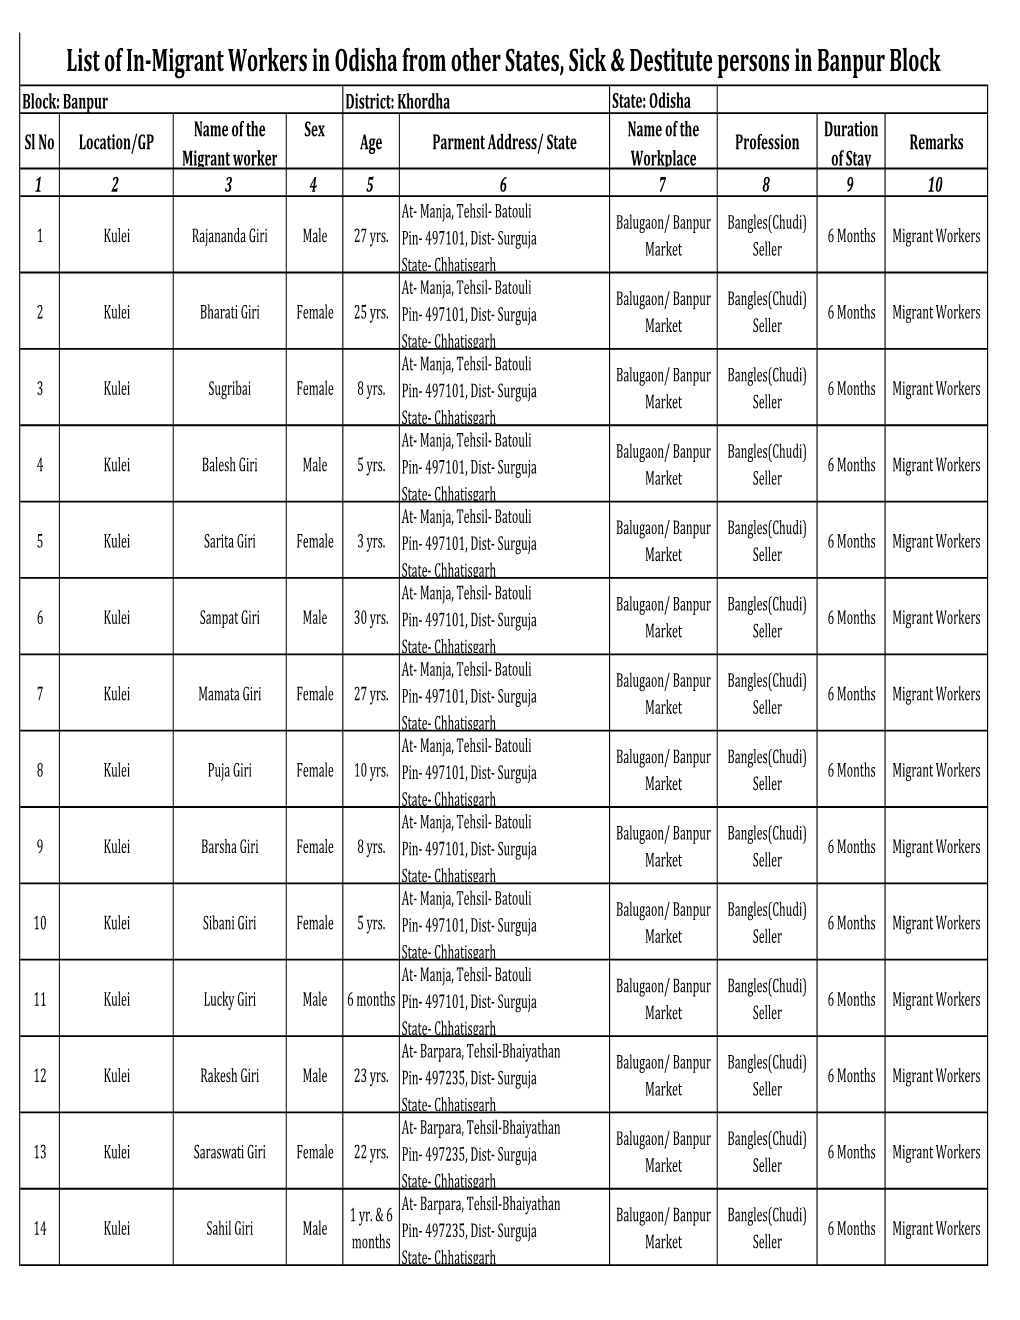 List of In-Migrant Workers in Odisha from Other States, Sick & Destitute